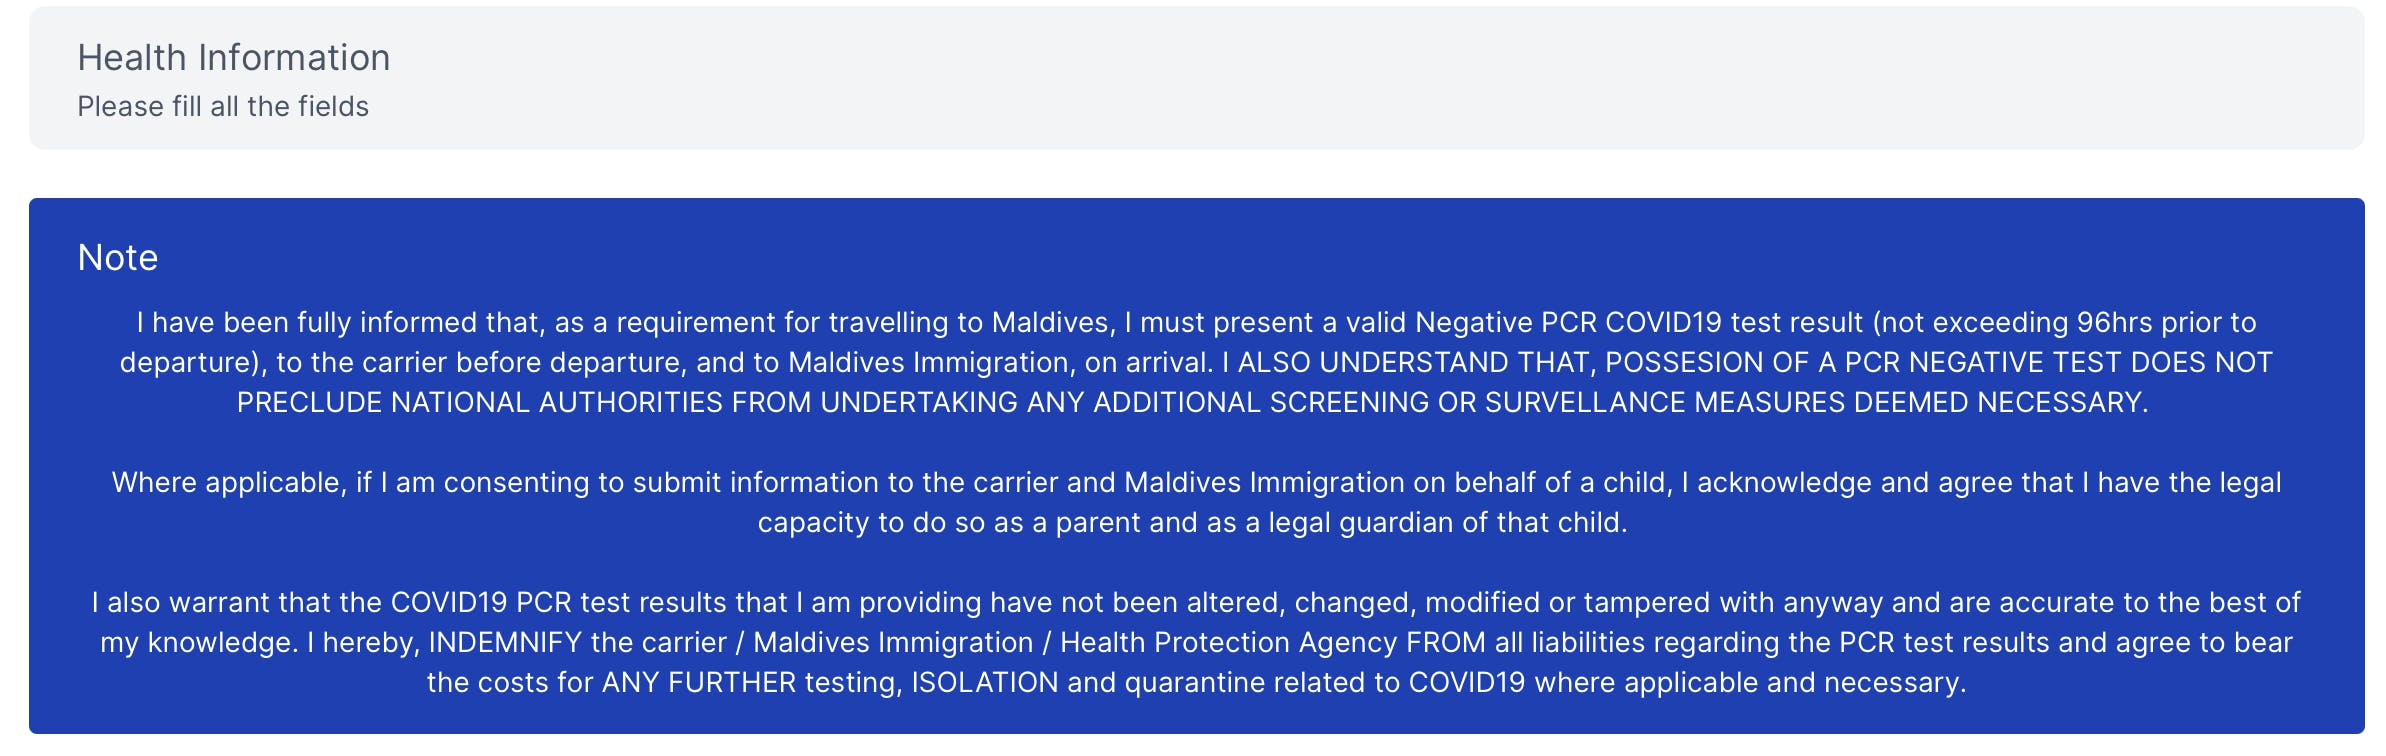 Health requirements on the Maldives Immigration Portal